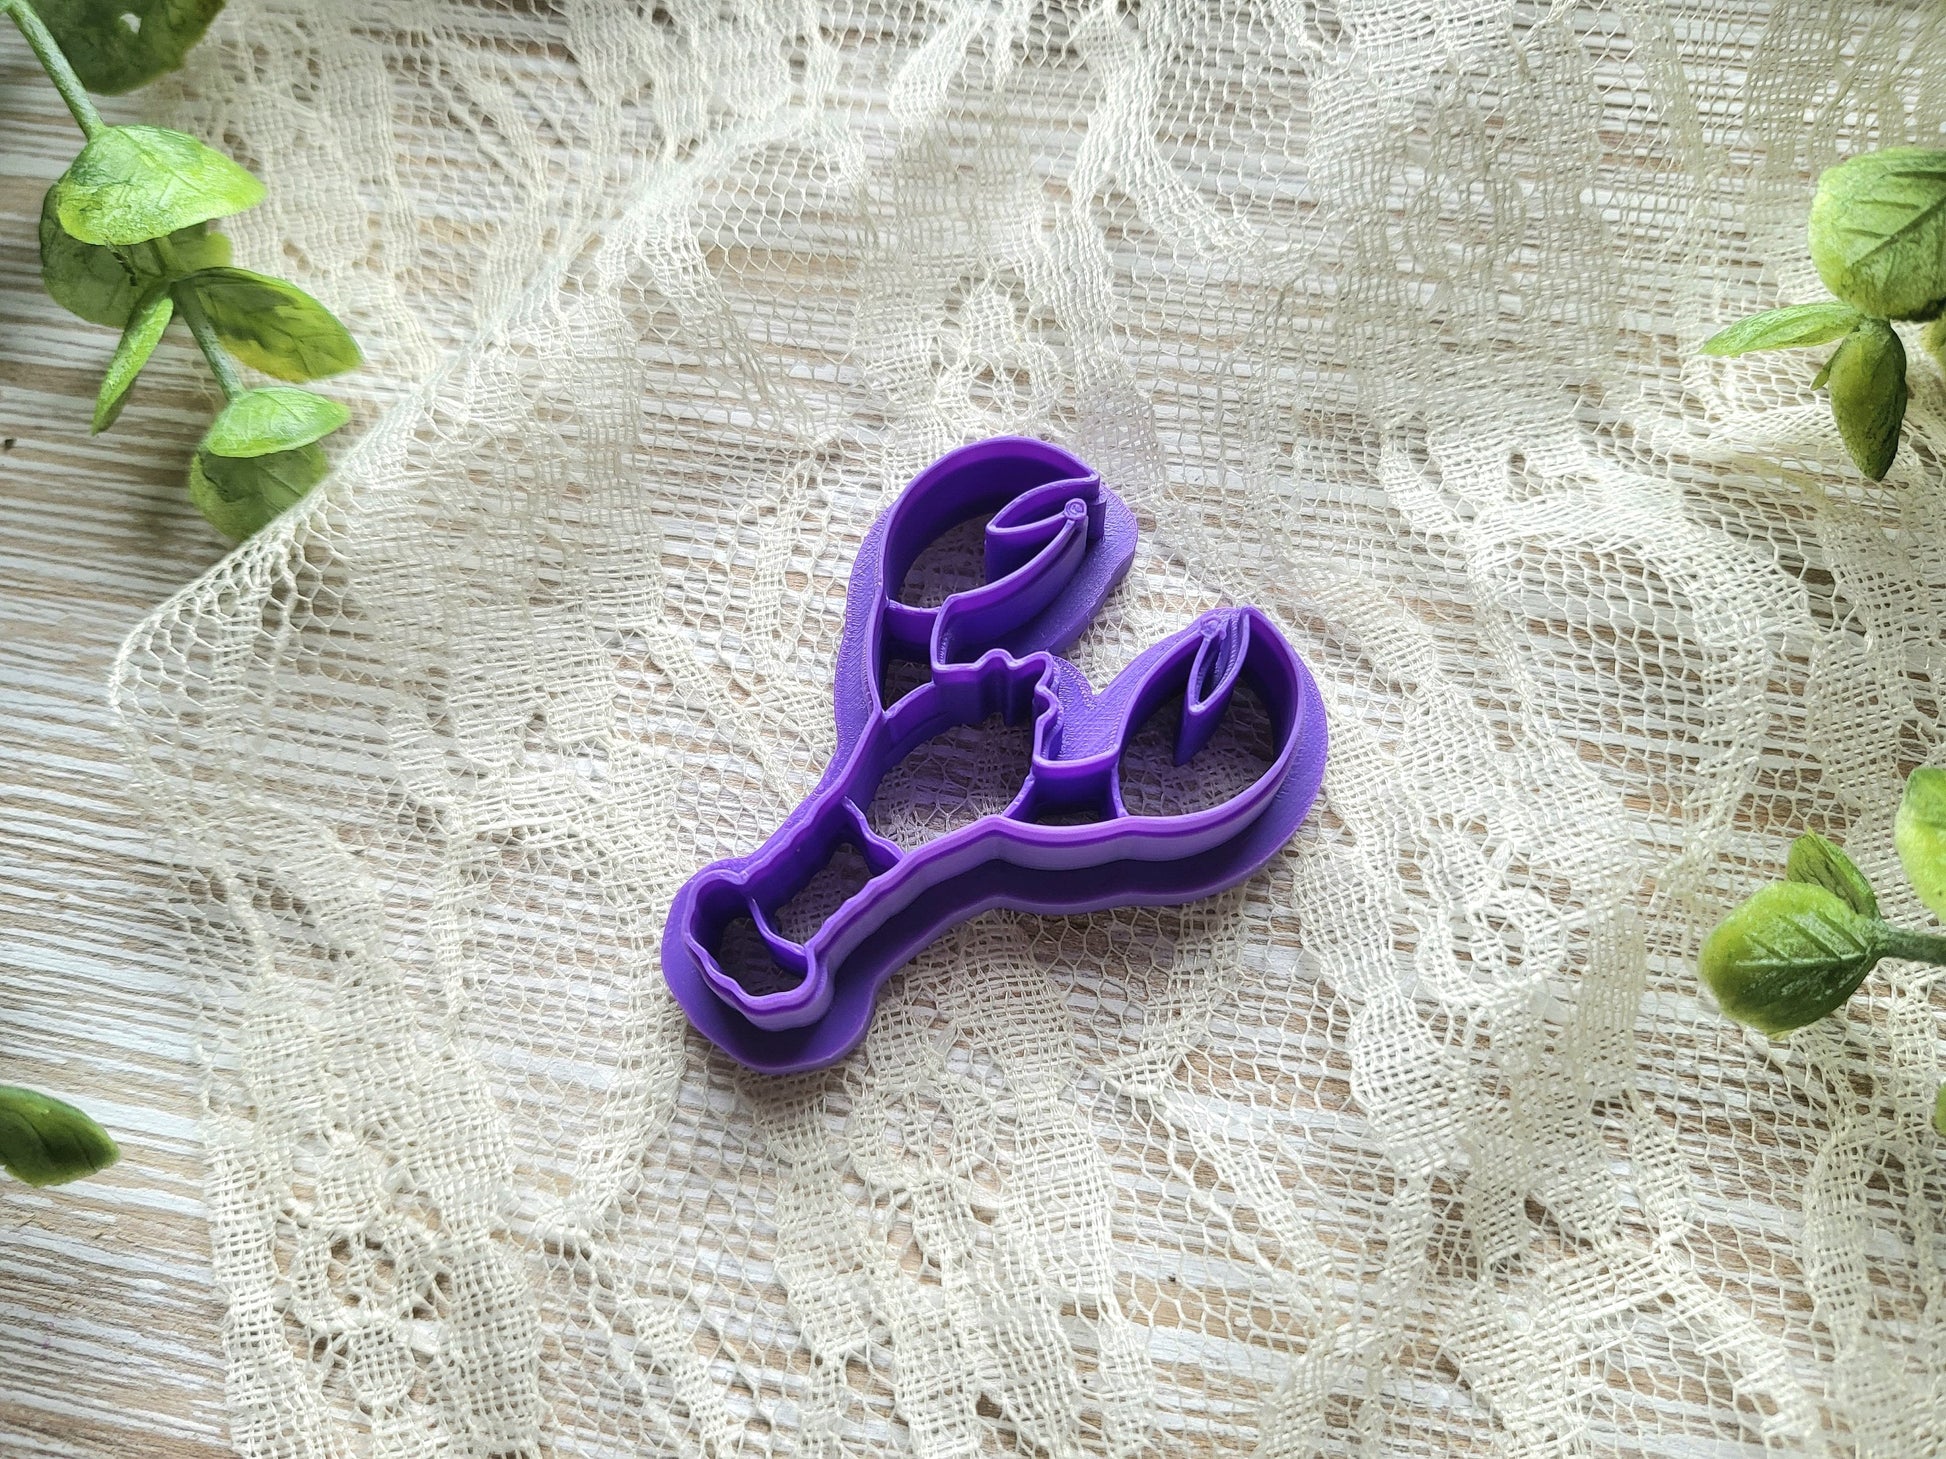 Lobster Polymer Clay Cutter, Animal Clay Cutter, Marine Life Clay Cutter, Marine Animal